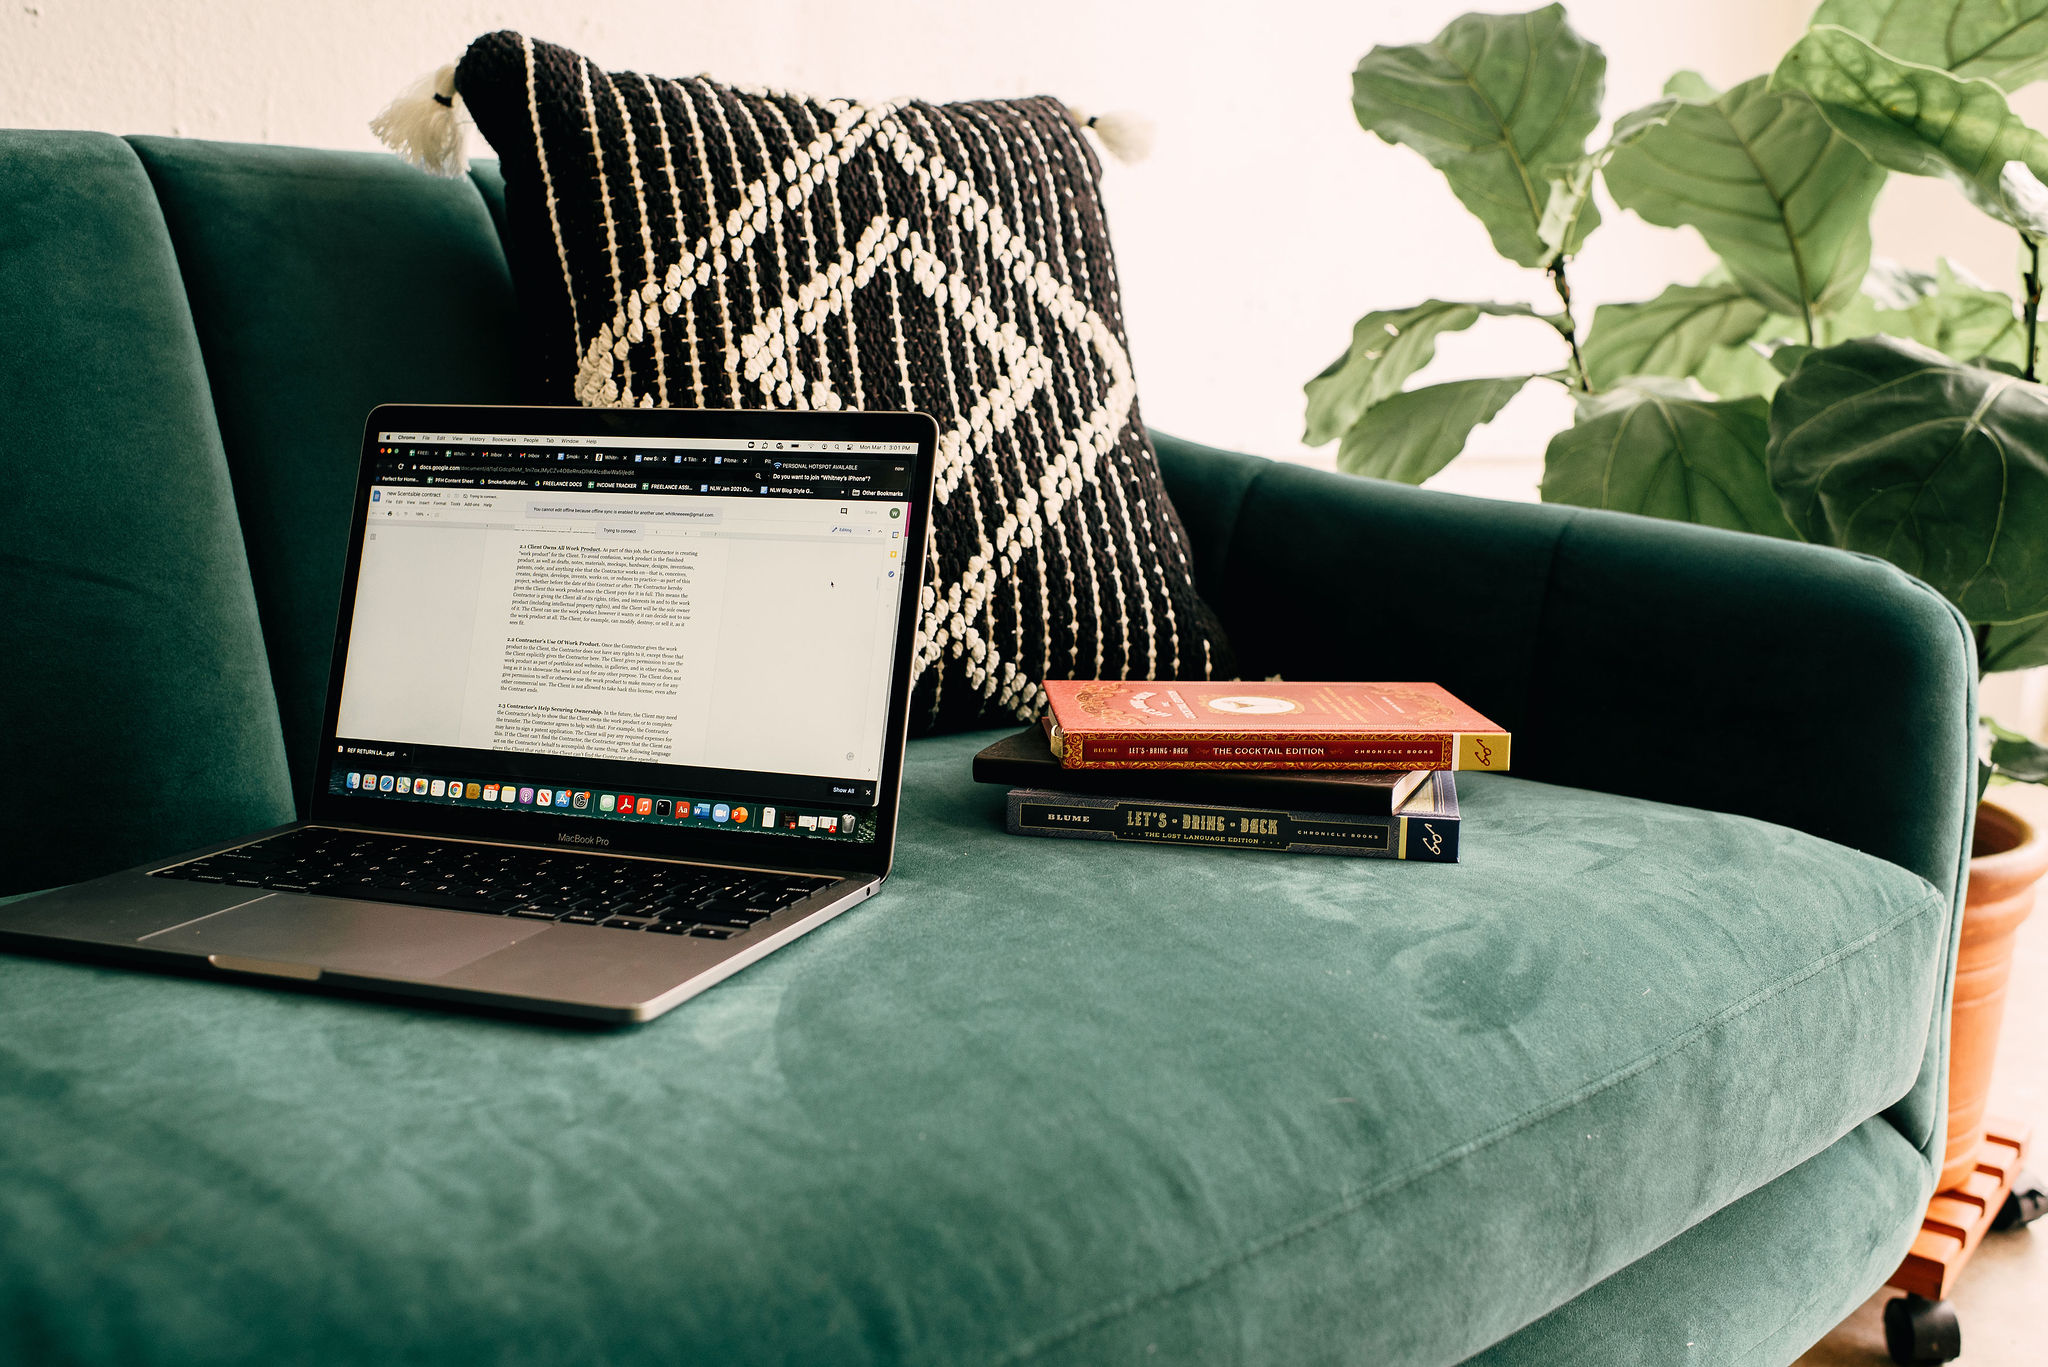 A laptop and books sit on a couch. WhitneyWroteThis.com discusses the importance of hiring a copywriter to create ethical website copy for your business.